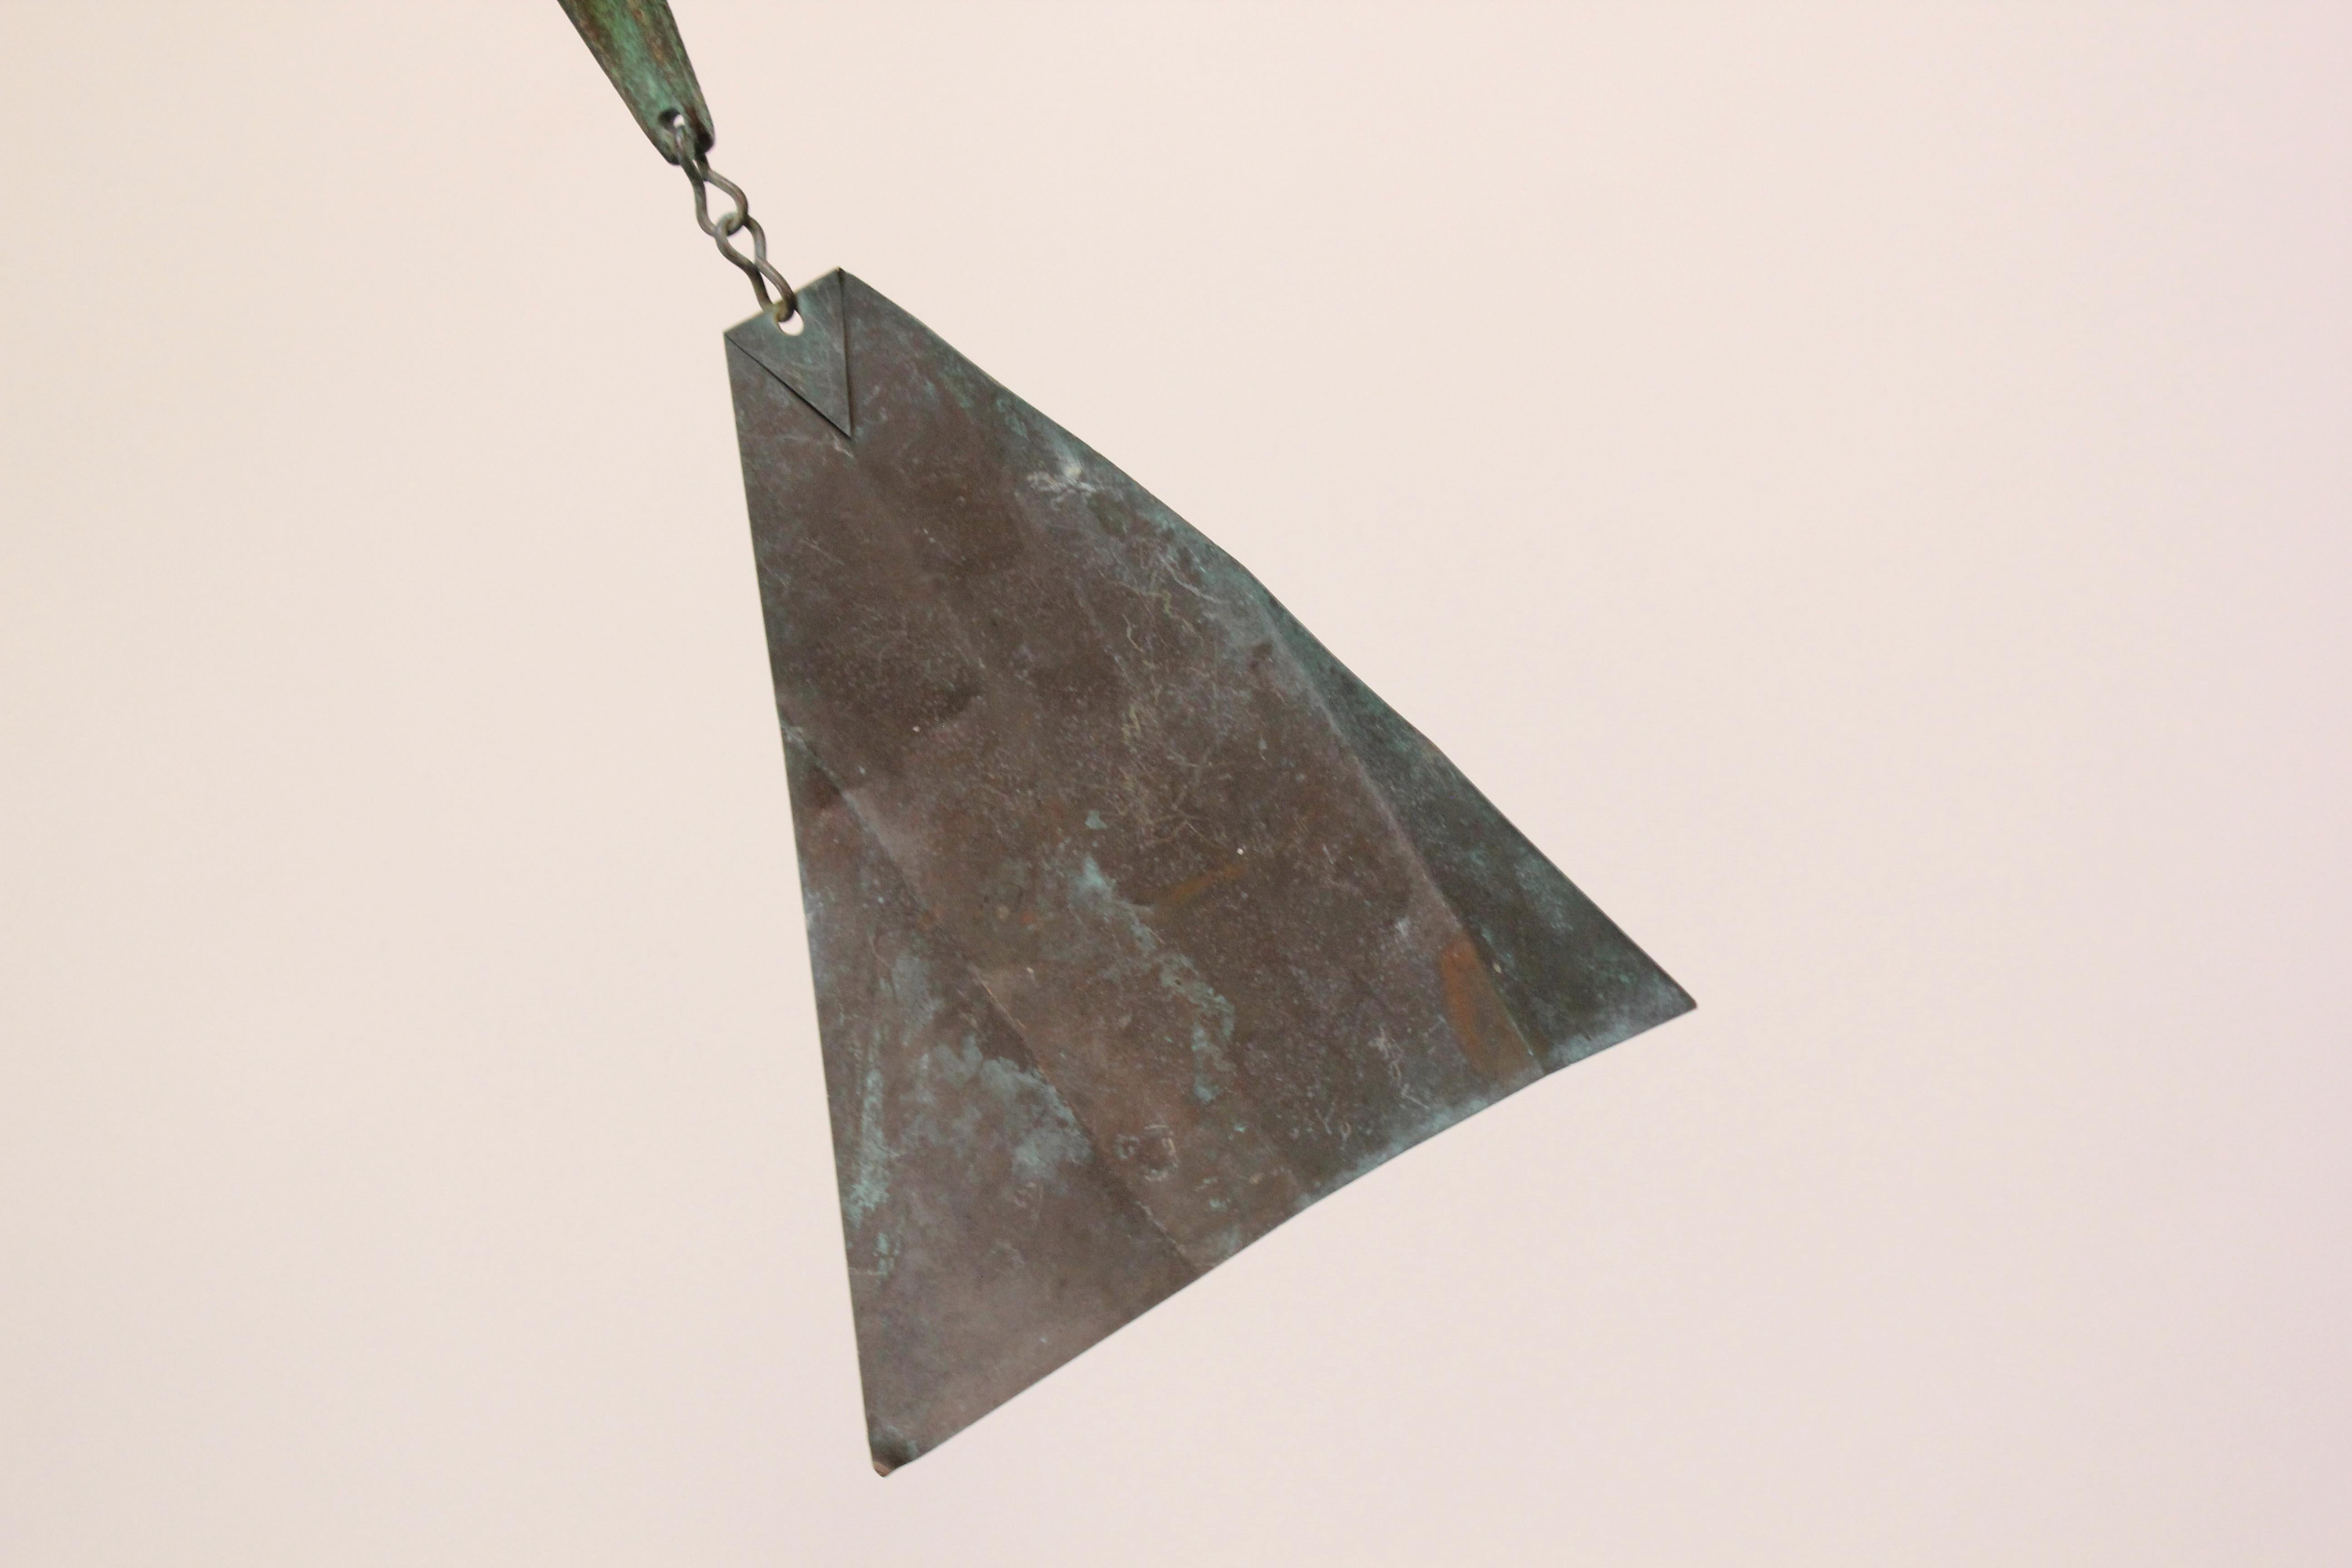 Cast Mid-Century Verdigris Bronze Bell / Wind Chime by Paolo Soleri for Arconsanti